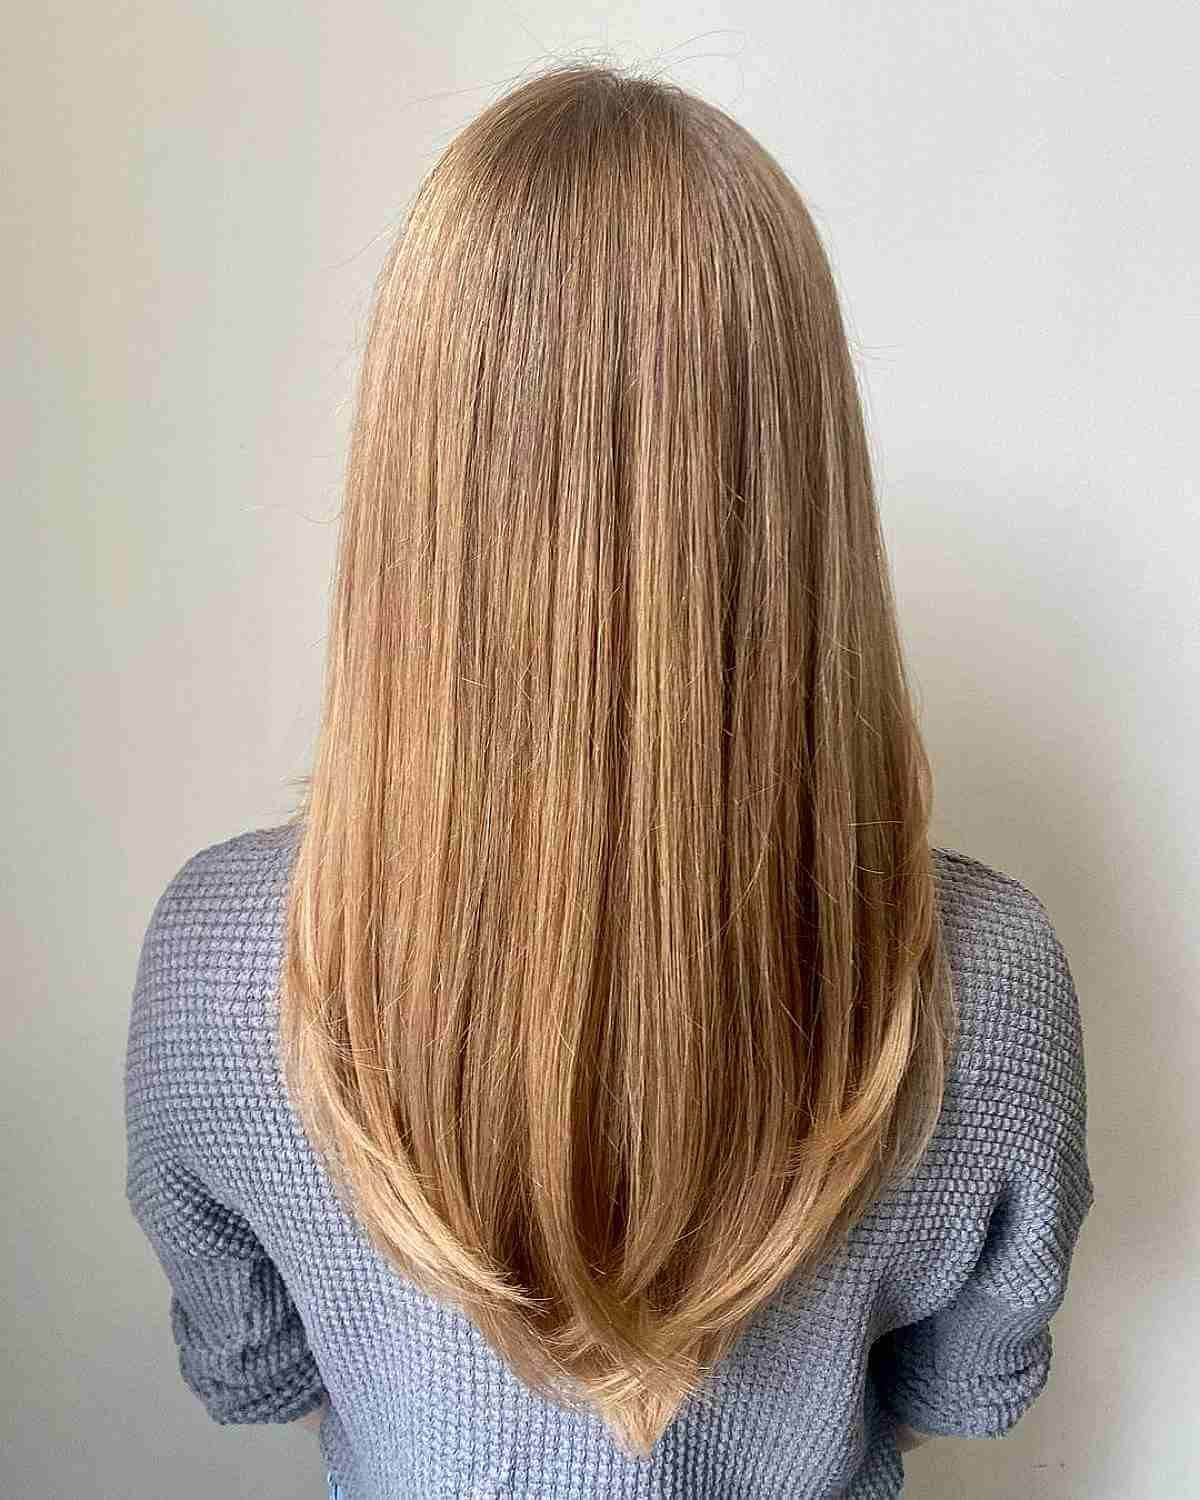 10 Beautiful Oval Layered Haircut Models From The Back 